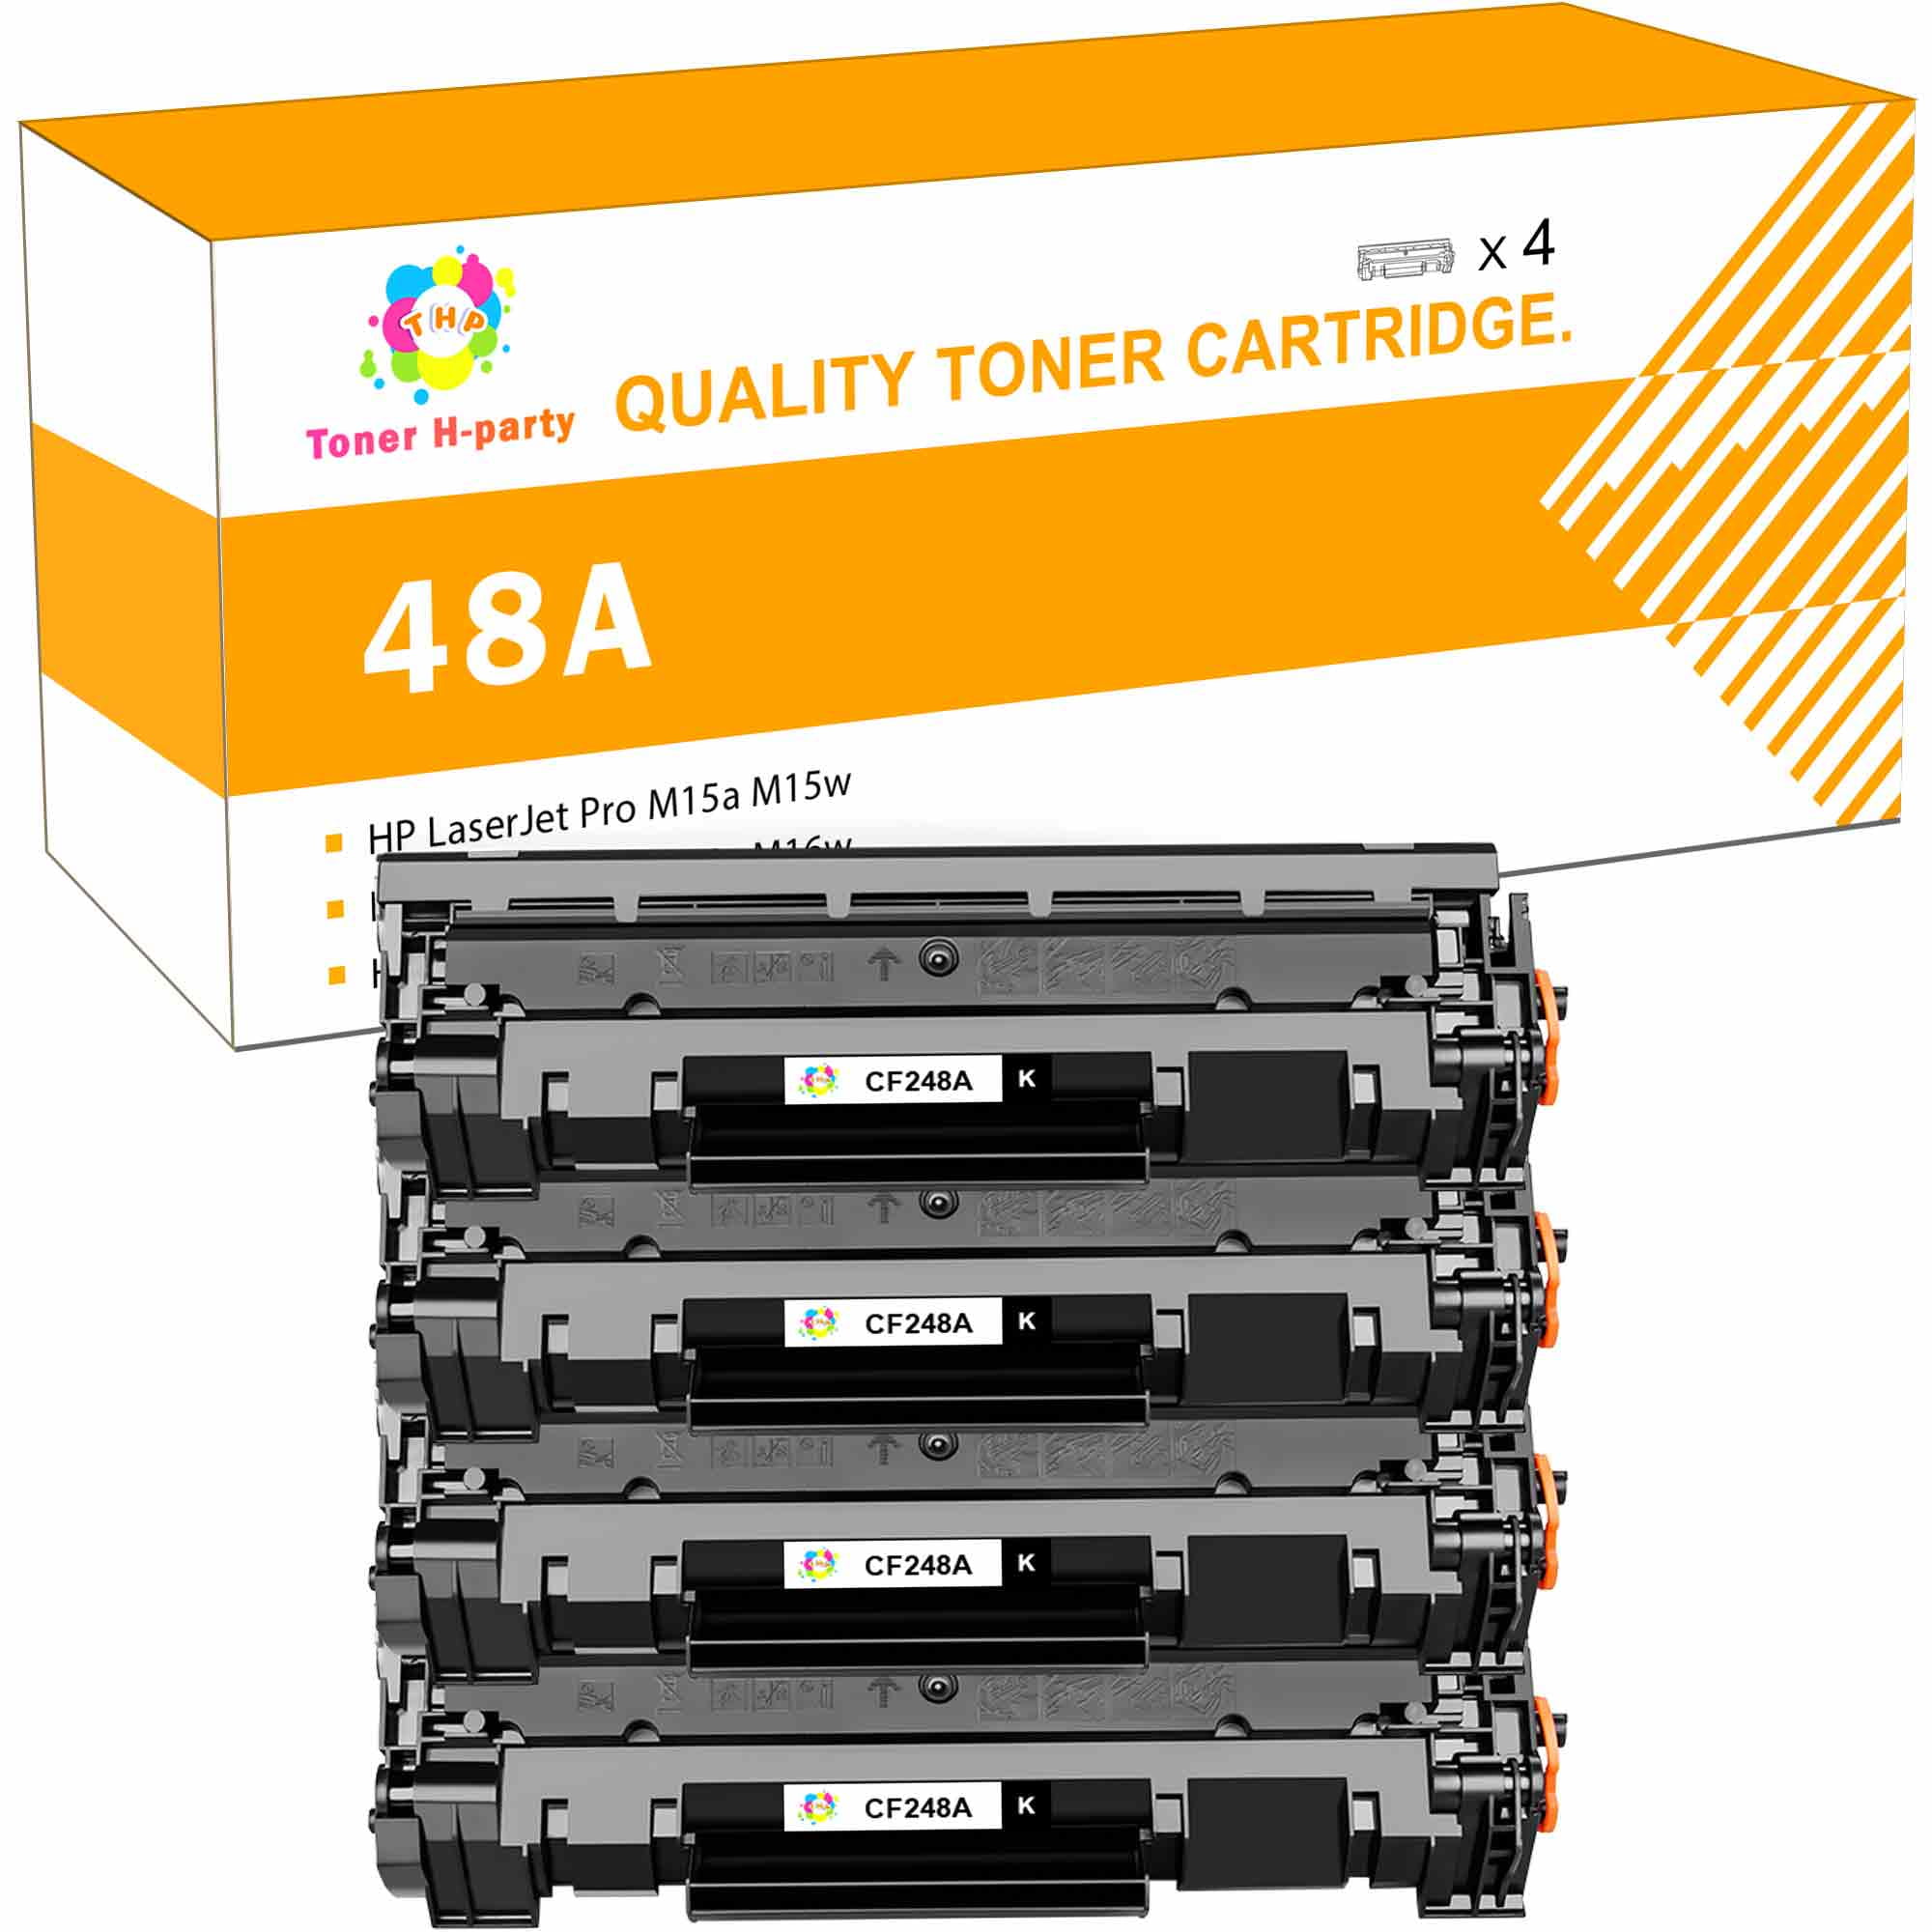 CF248A Black Toner Cartridge Replacement for Laserjet Pro M15a M15w MFP M28a MFP M28w MFP M29w MFP M30w MFP M31w Printer Ink Cartridge 1 Pack 48A Toner Compatible for HP 48A